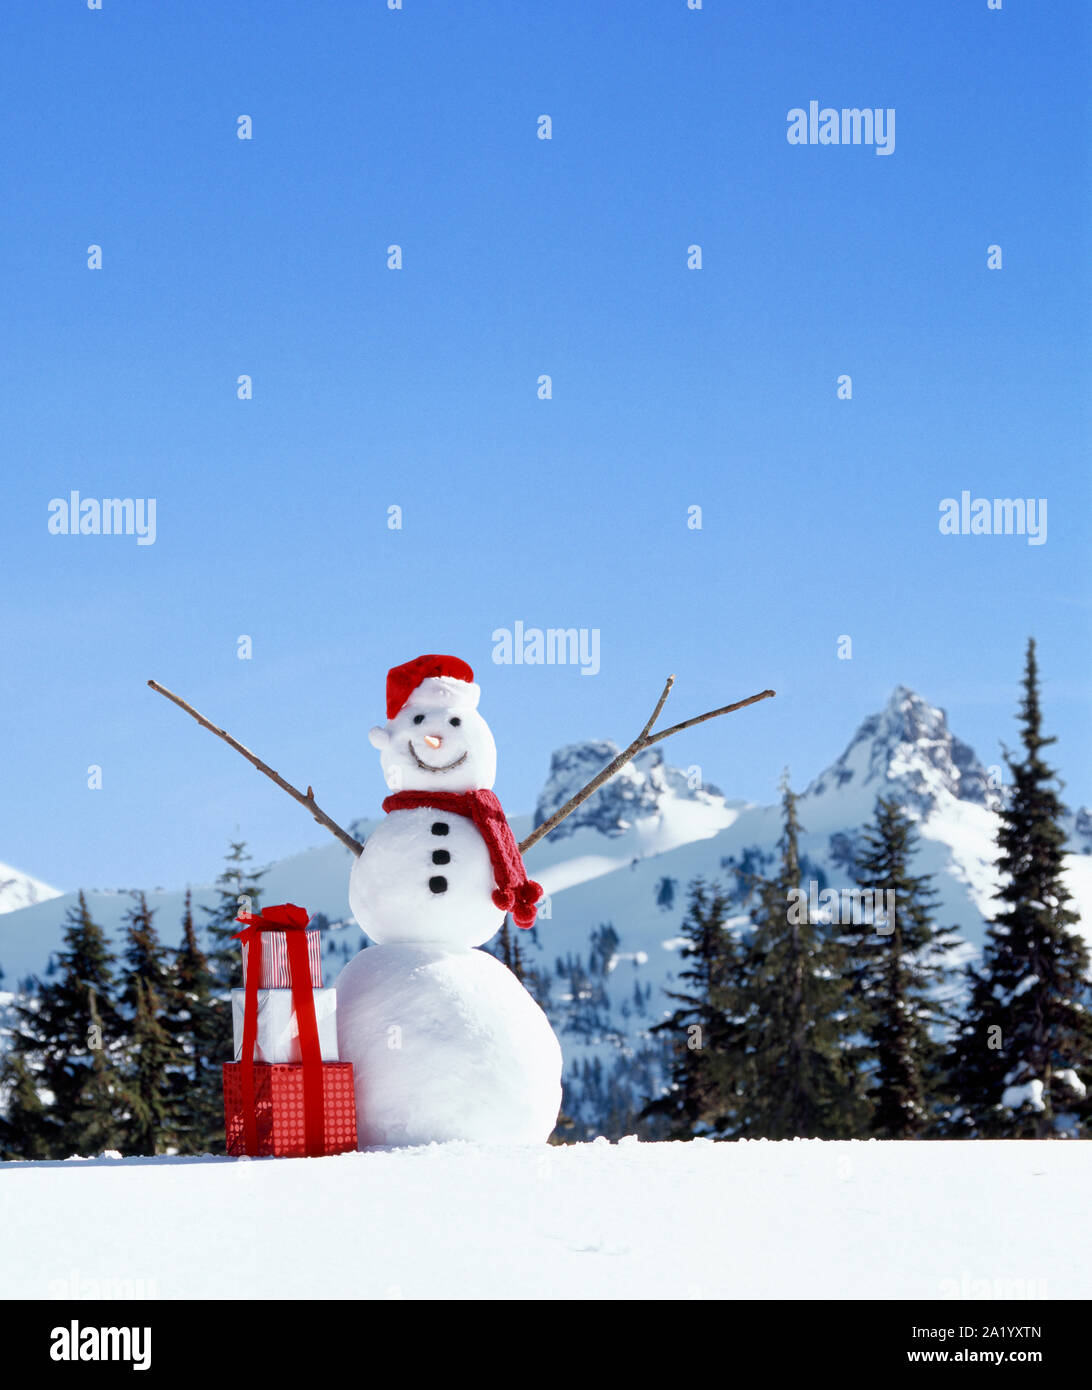 Happy, smiling snowman with Santa hat, stack of festive, wrapped Christmas gifts presents and snowy mountains in background Stock Photo